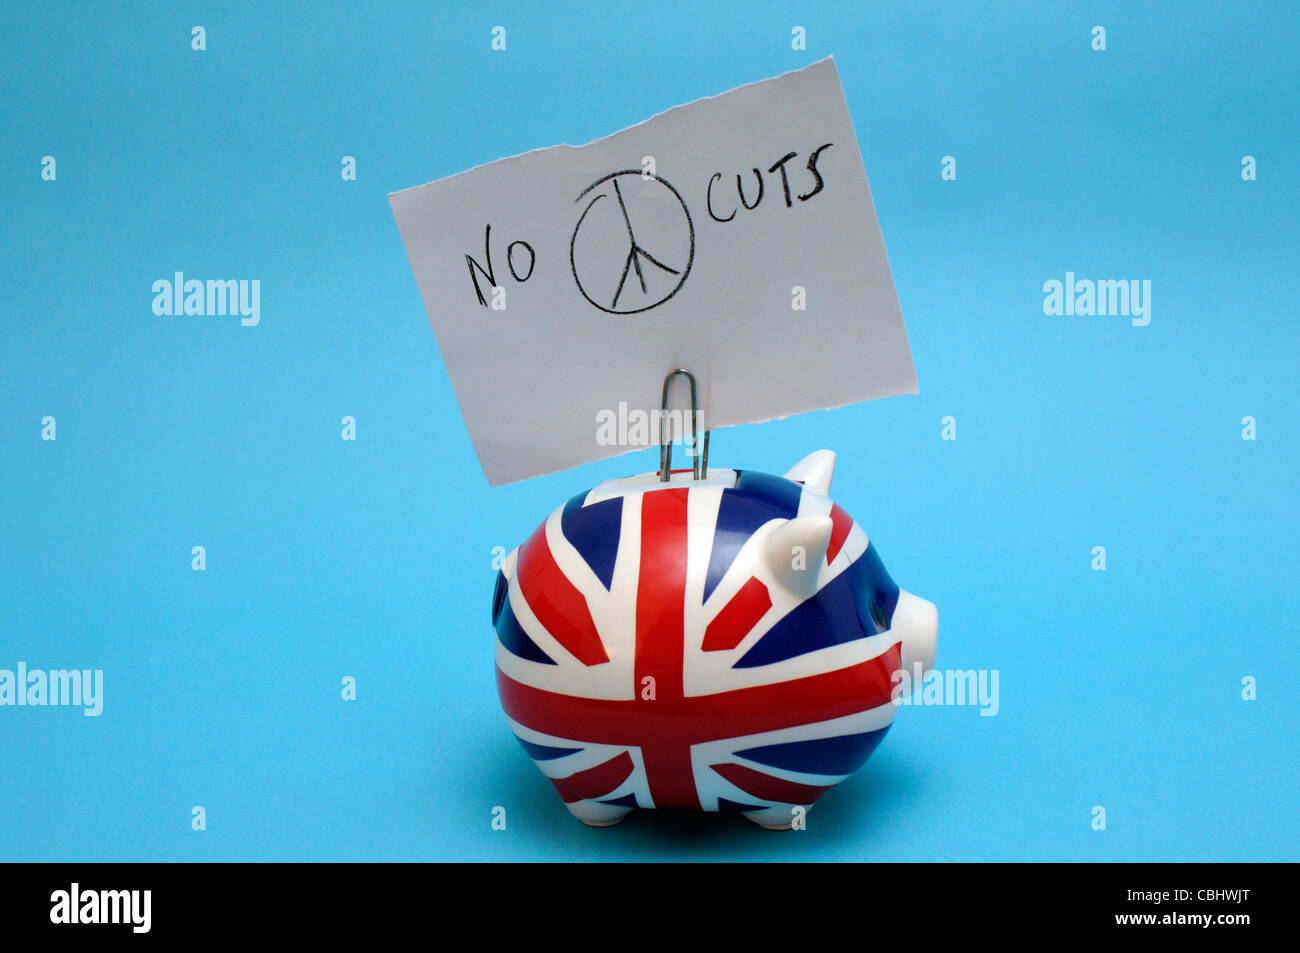 Debt Crisis. Savings and falling value of currencies. How does the British economy recover from its economic debt crisis. Stock Photo